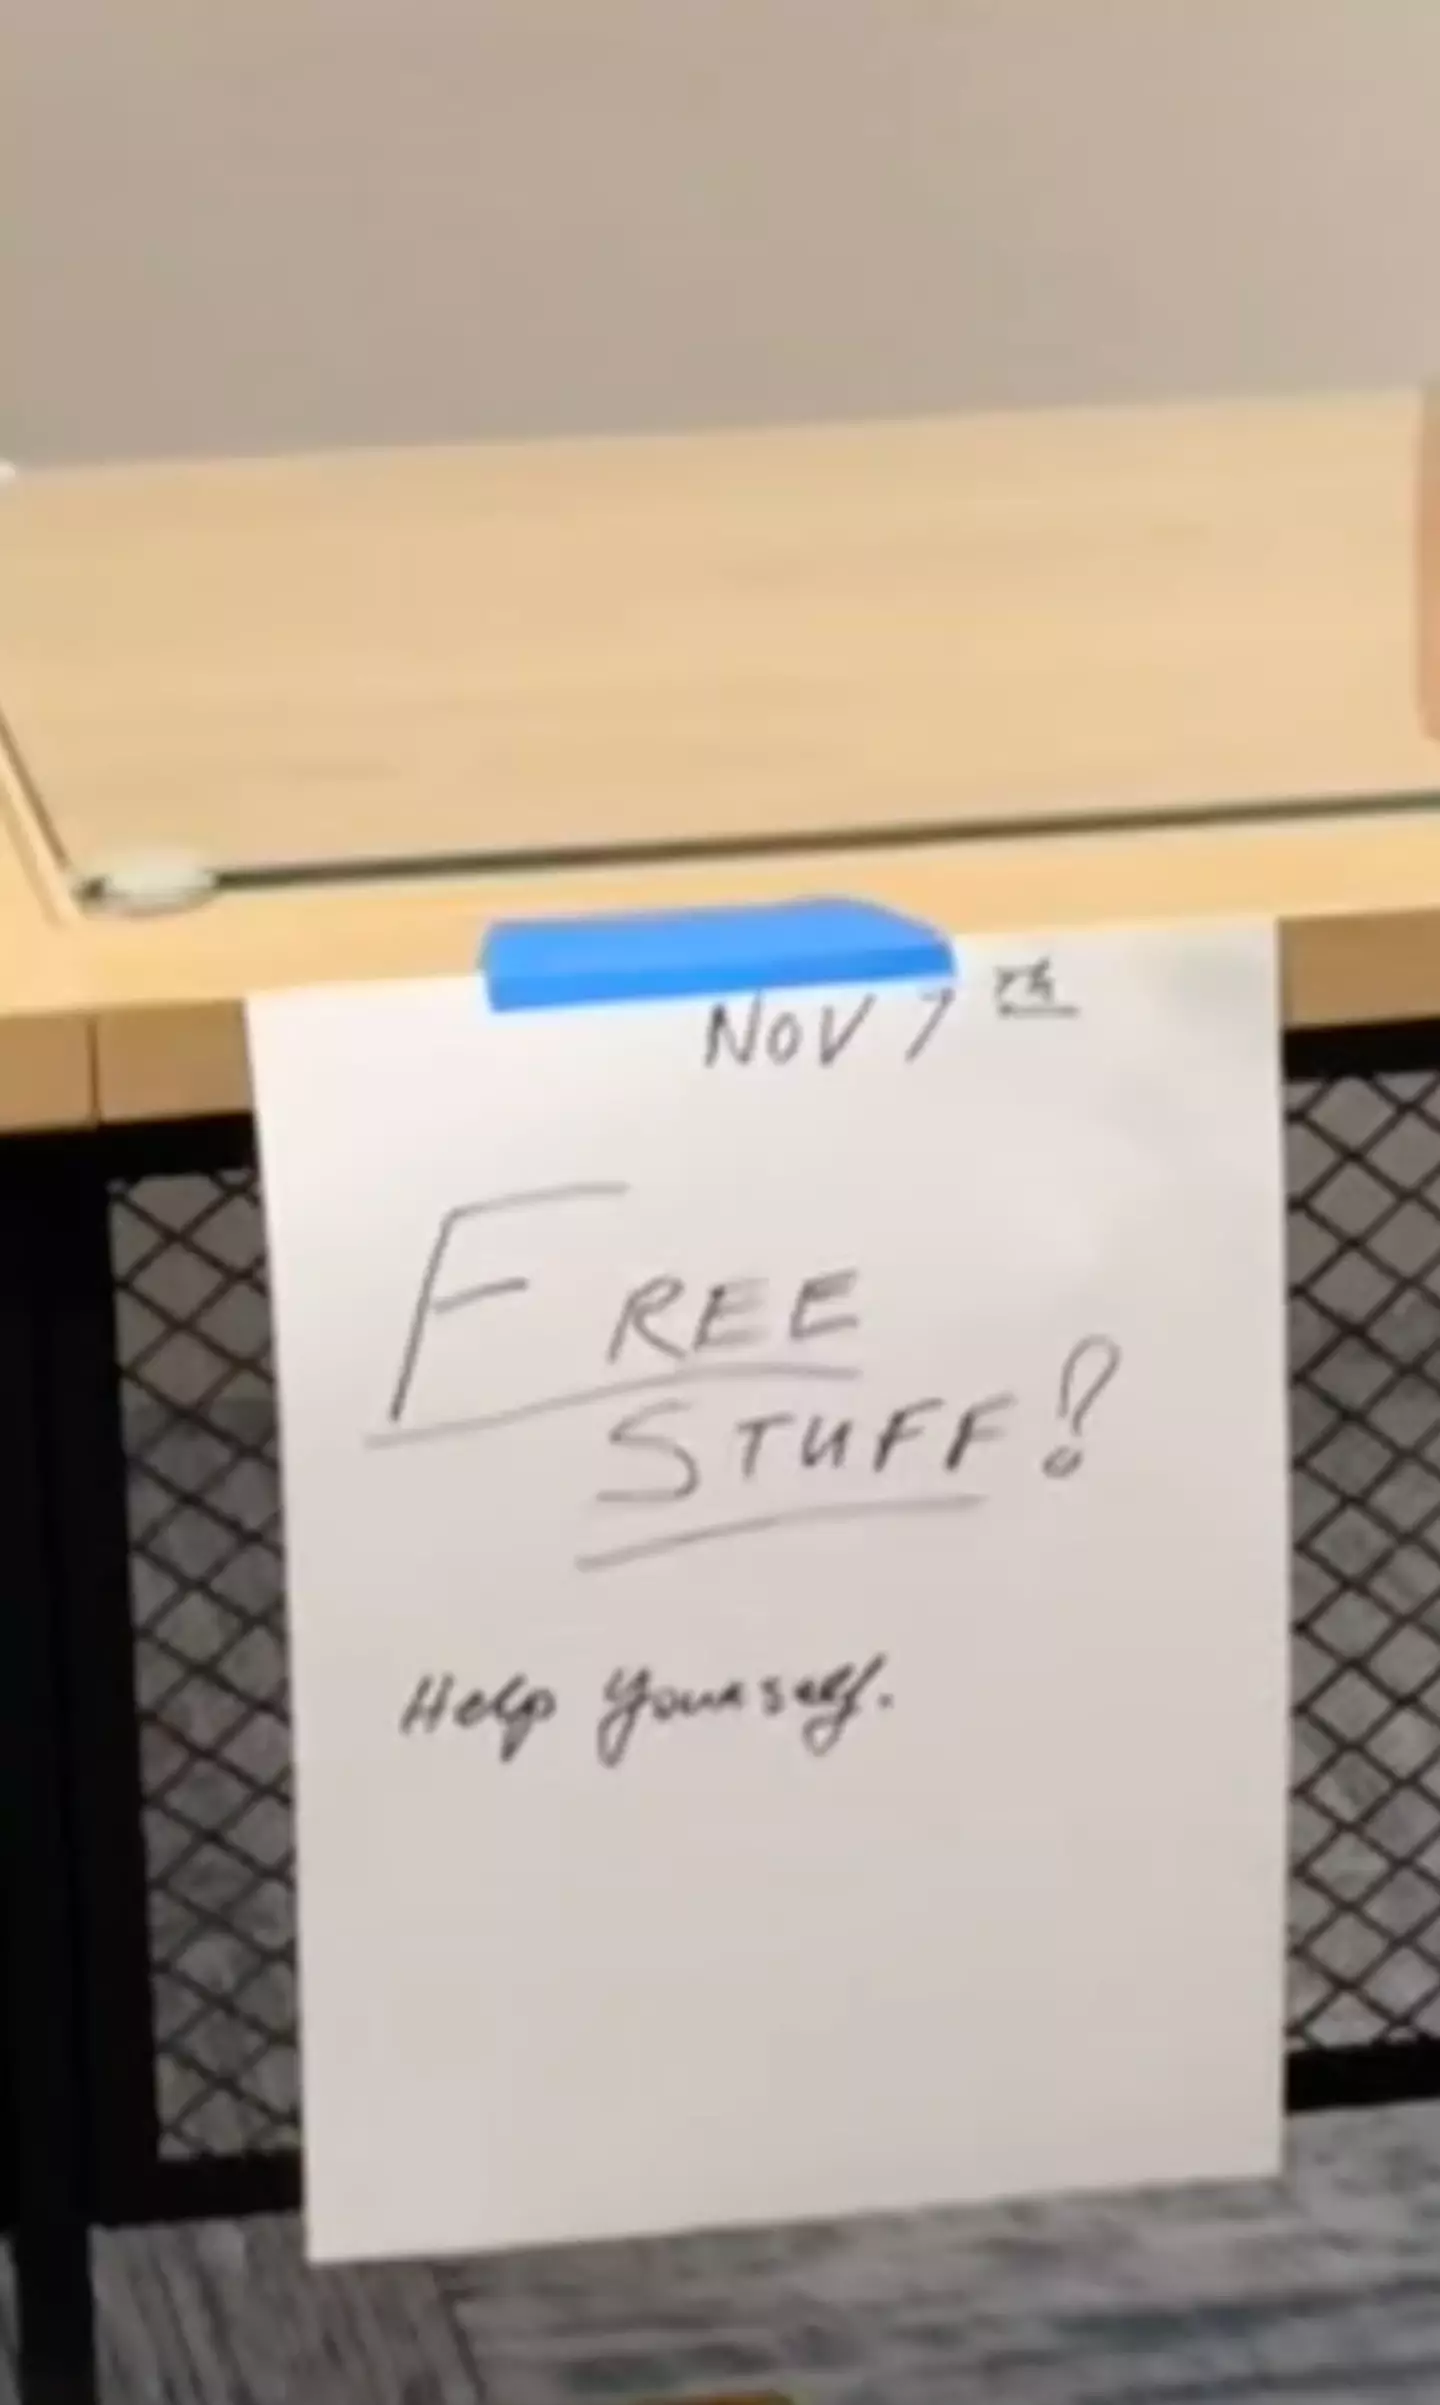 The furniture was being given away for free. (TikTok/@avocandreatoast)